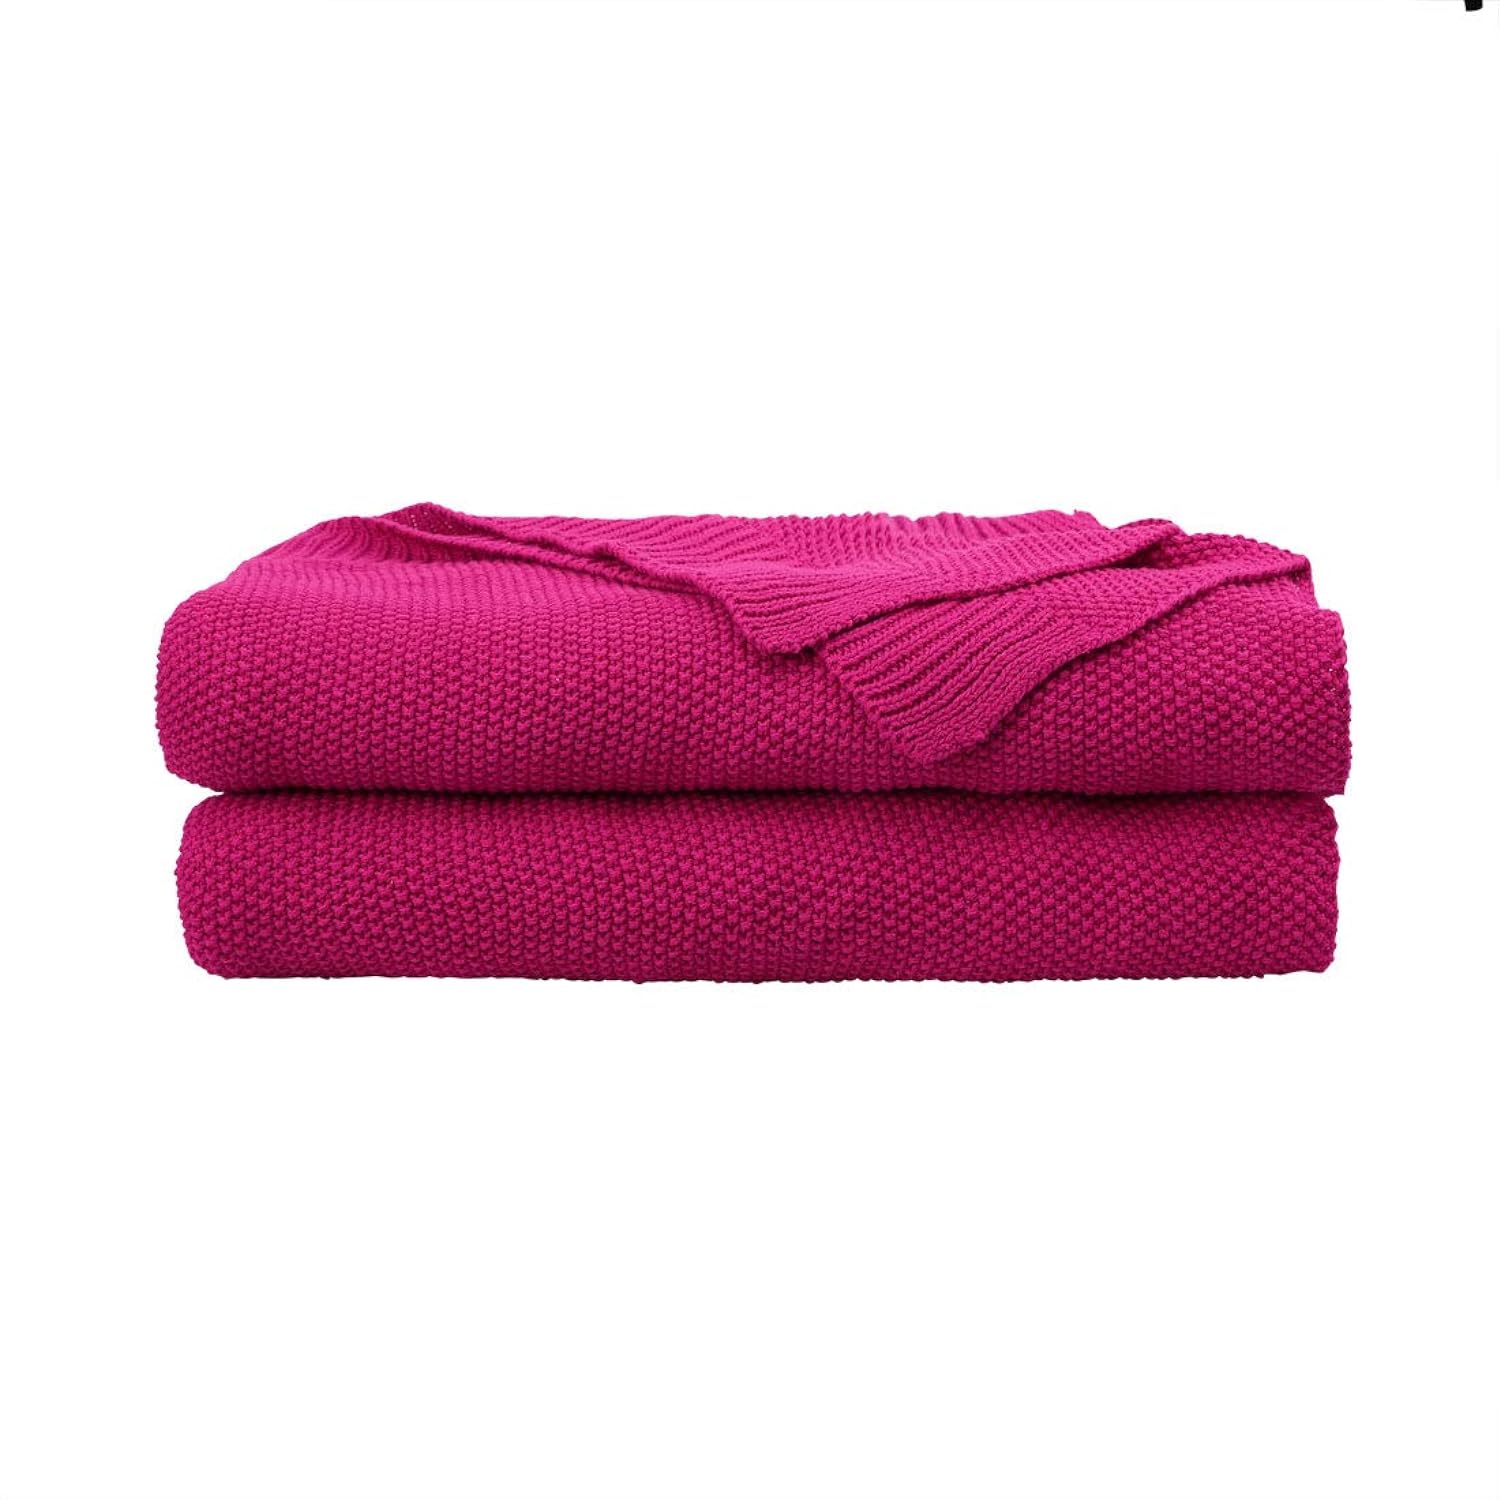 Great Choice Products 100% Cotton Knit Throw Blanket,Solid Lightweight Decorative Throws And Blankets,Soft Knitted Throw Blanket For Sofa Couch, Fu?